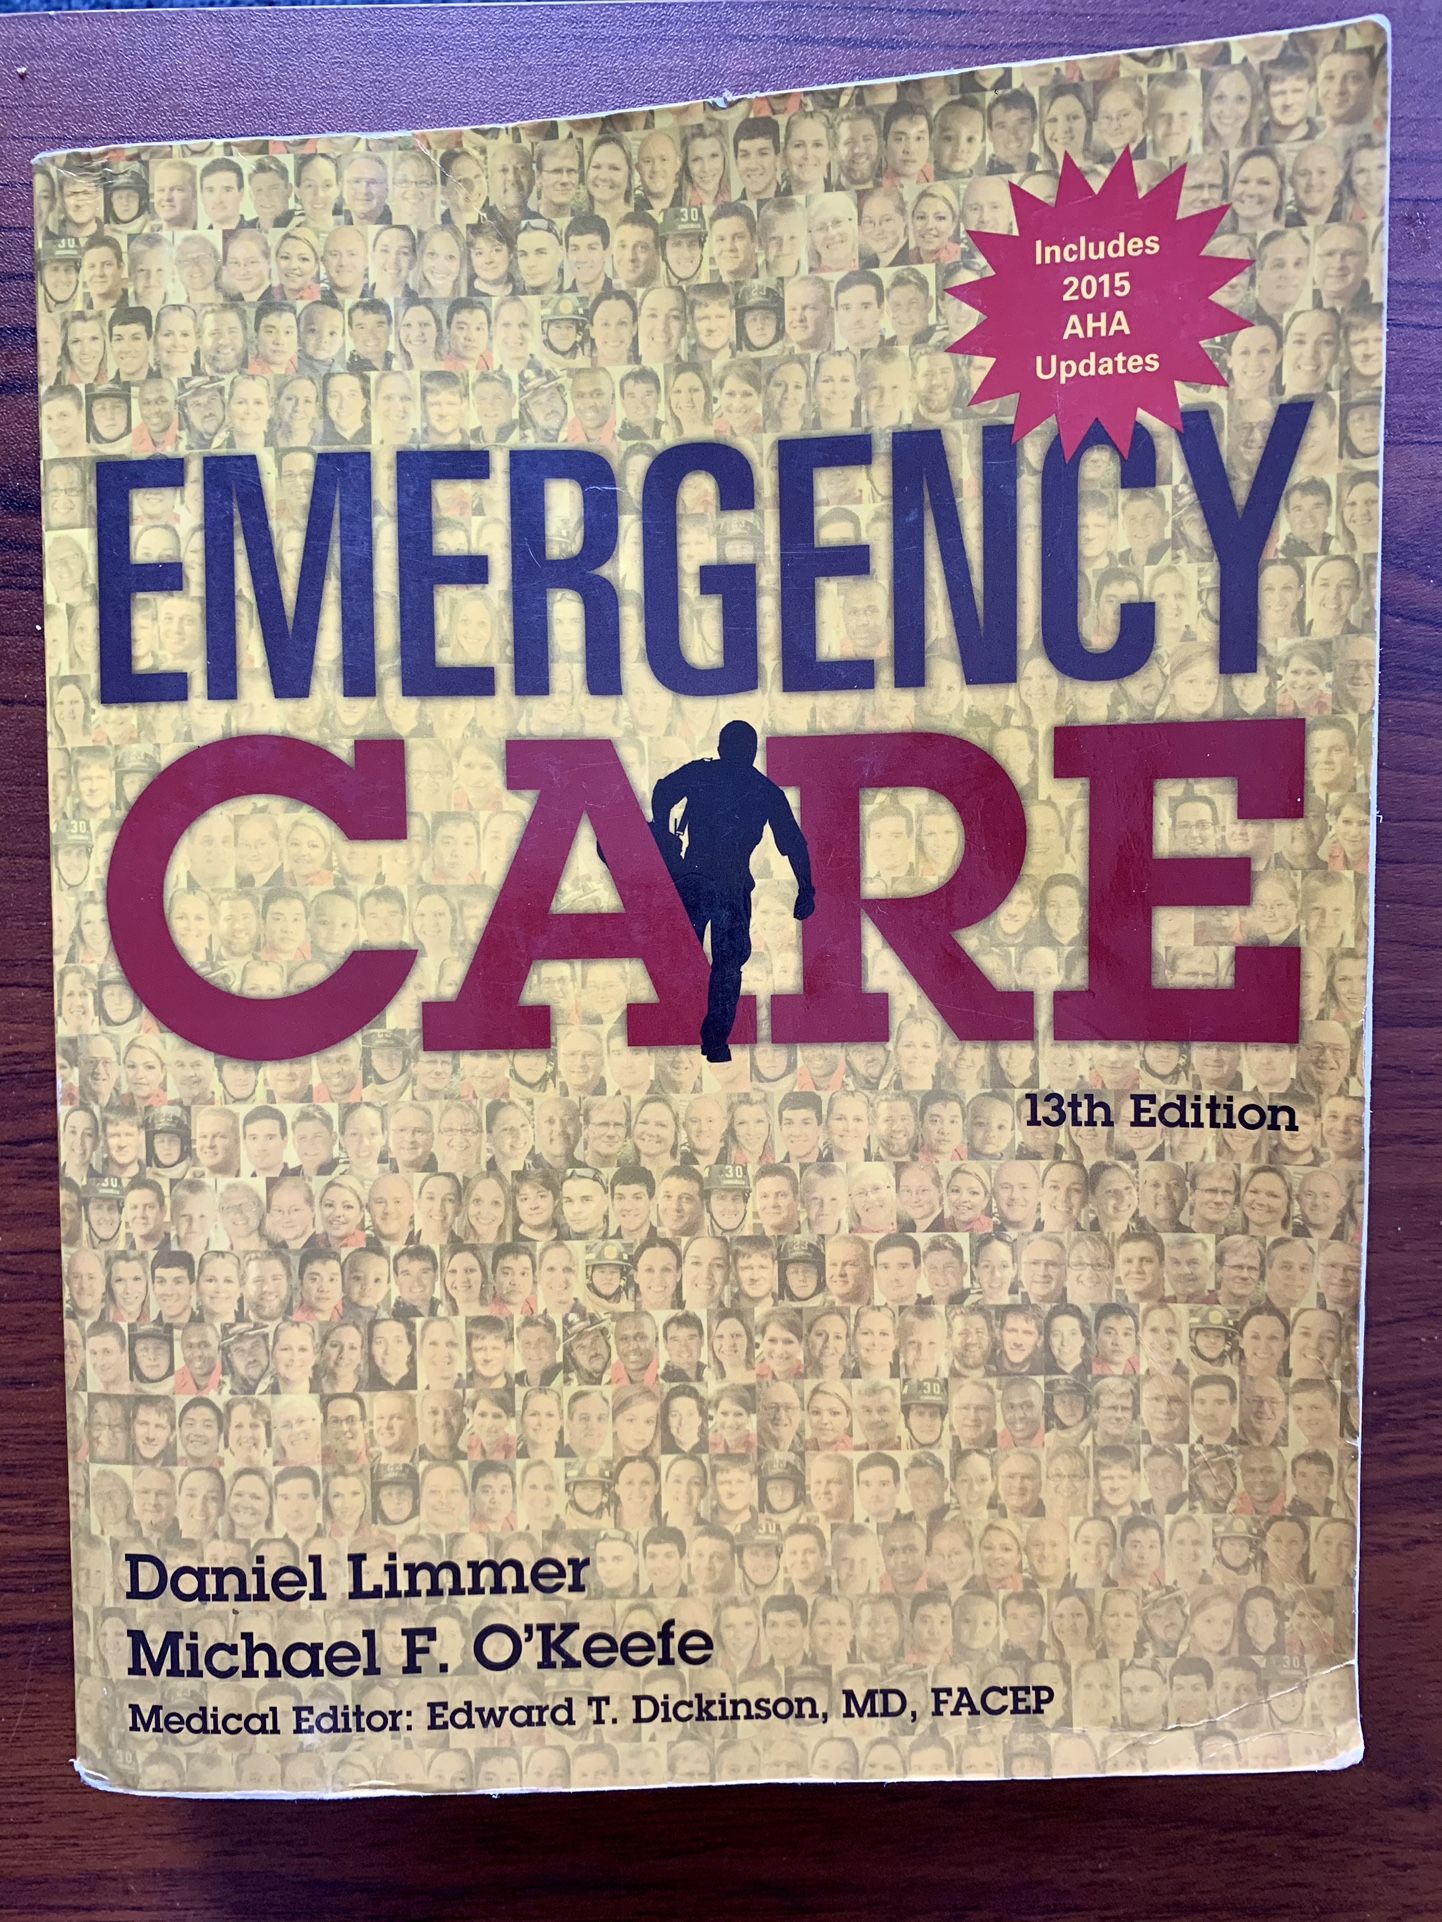 EMT Manual - Emergency  Care 13th Edition